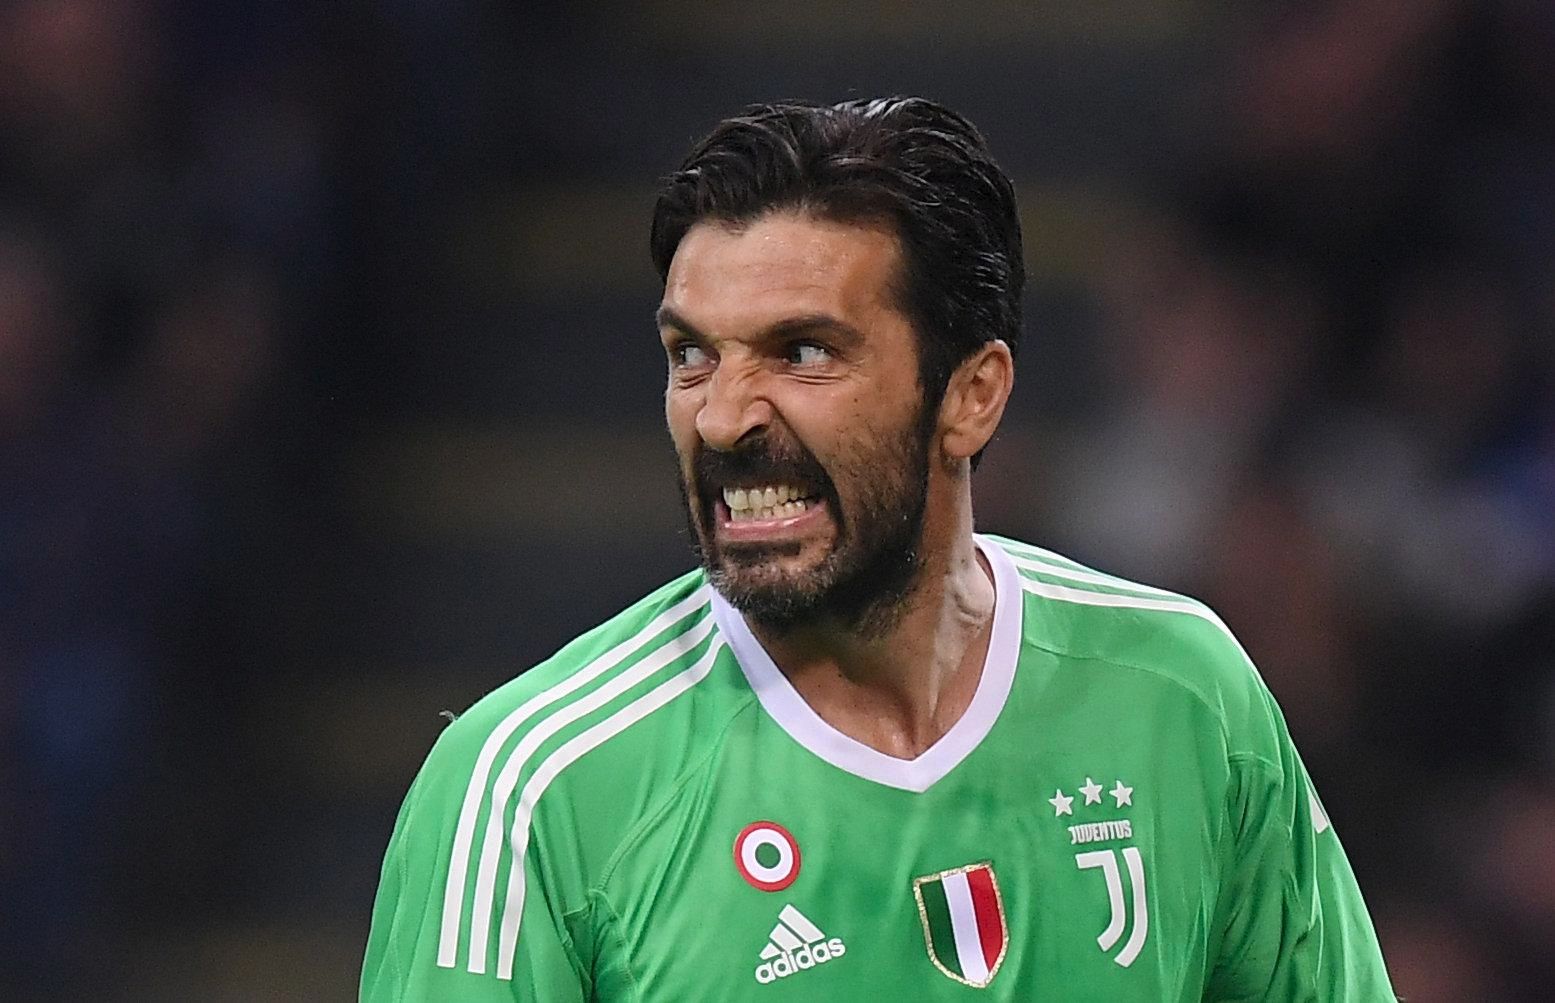 Legendary goalkeeper Buffon admits that leaving PSG was the biggest mistake of his career